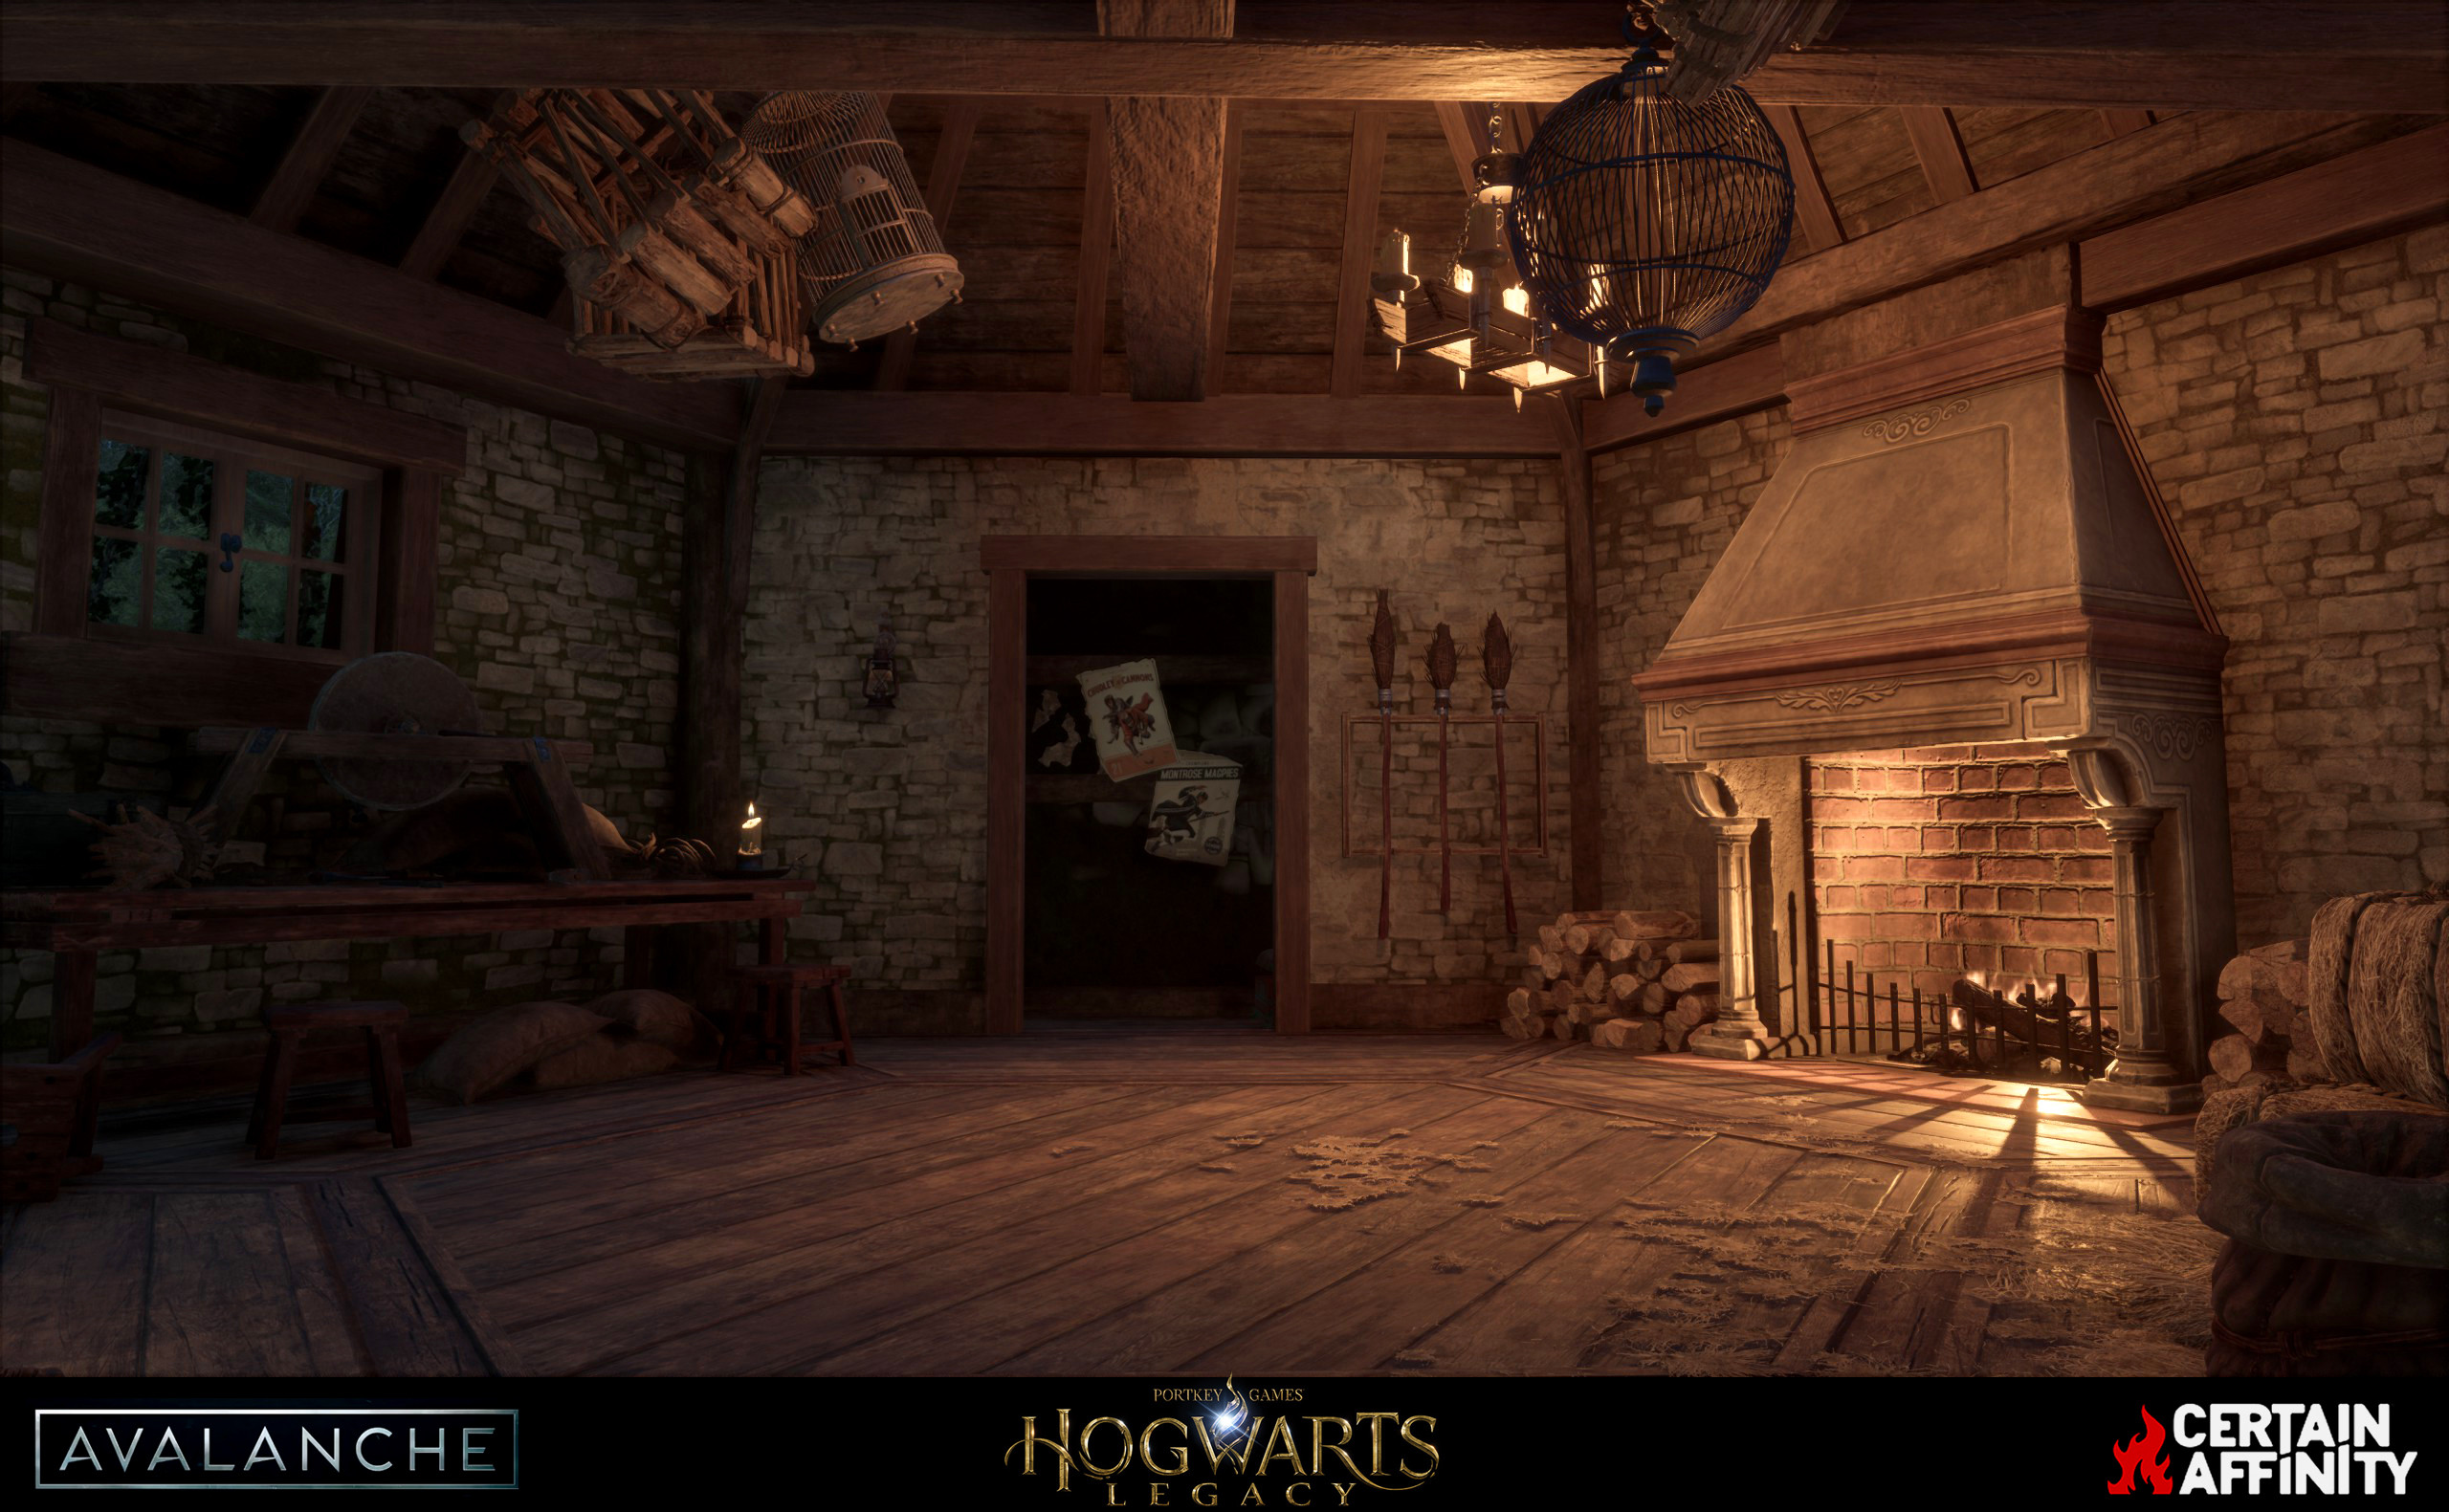 I worked on set dressing the interior of Hagrid's hut as well